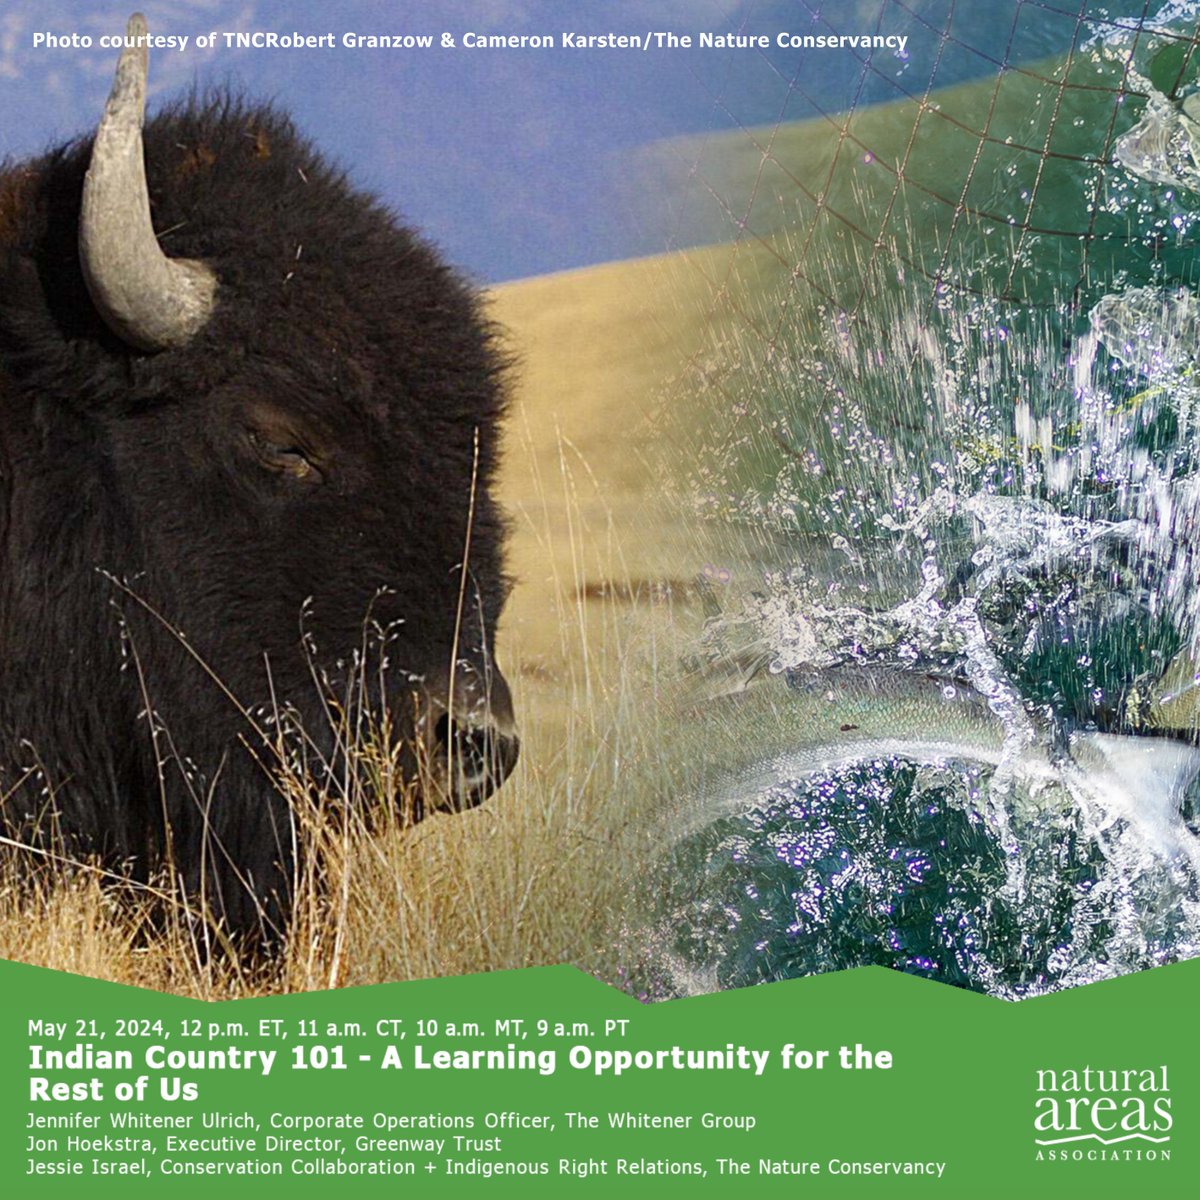 Learn to be a conscientious conservation partner to Tribal Nations! Join us on May 21, 2024, for Indian Country 101 - A Learning Opportunity for the Rest of Us. Special thanks to @BLMNational and @forestservice. Learn more: bit.ly/3v3R4lV